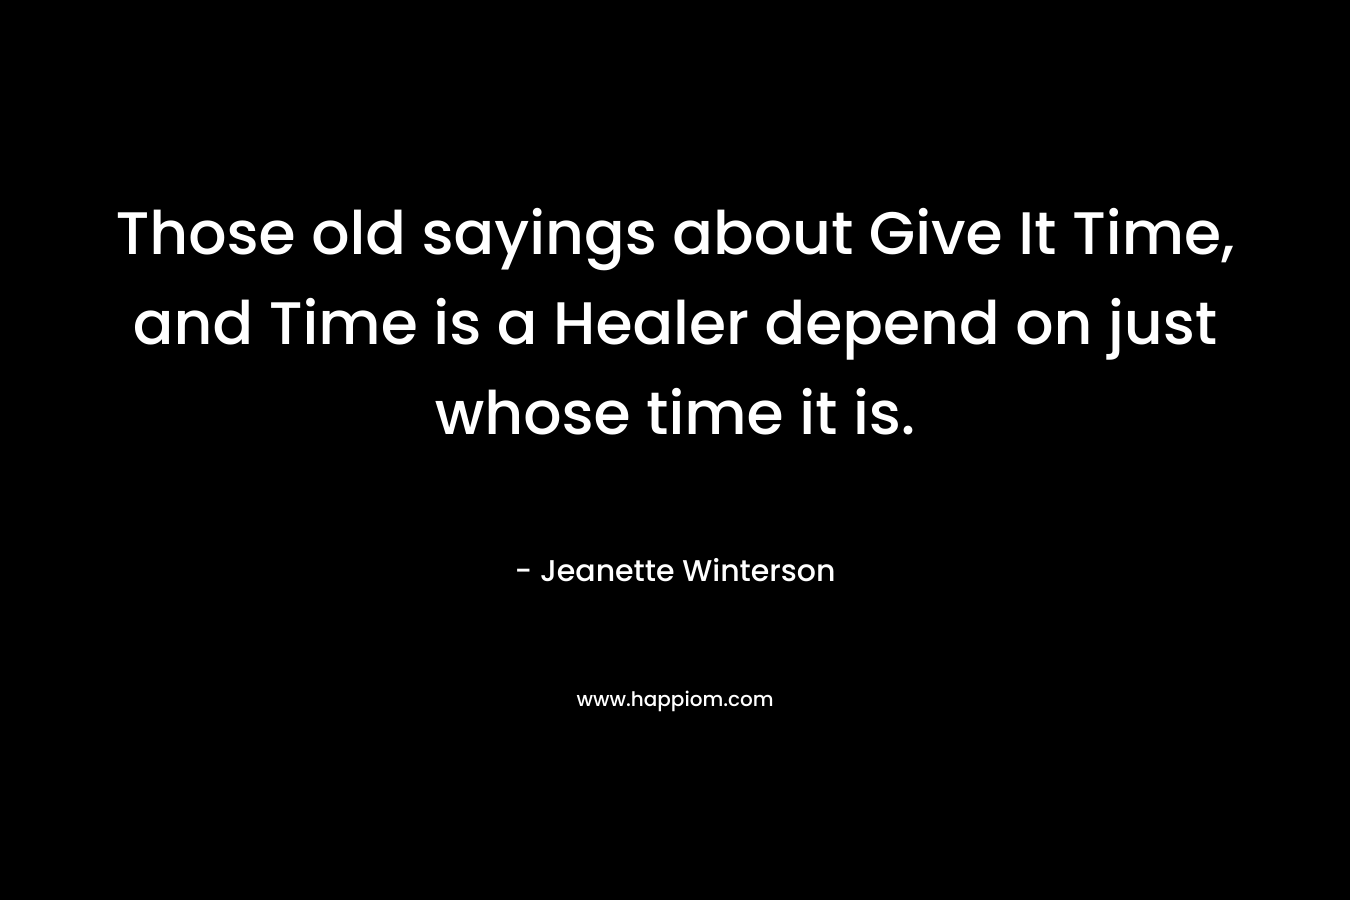 Those old sayings about Give It Time, and Time is a Healer depend on just whose time it is. – Jeanette Winterson